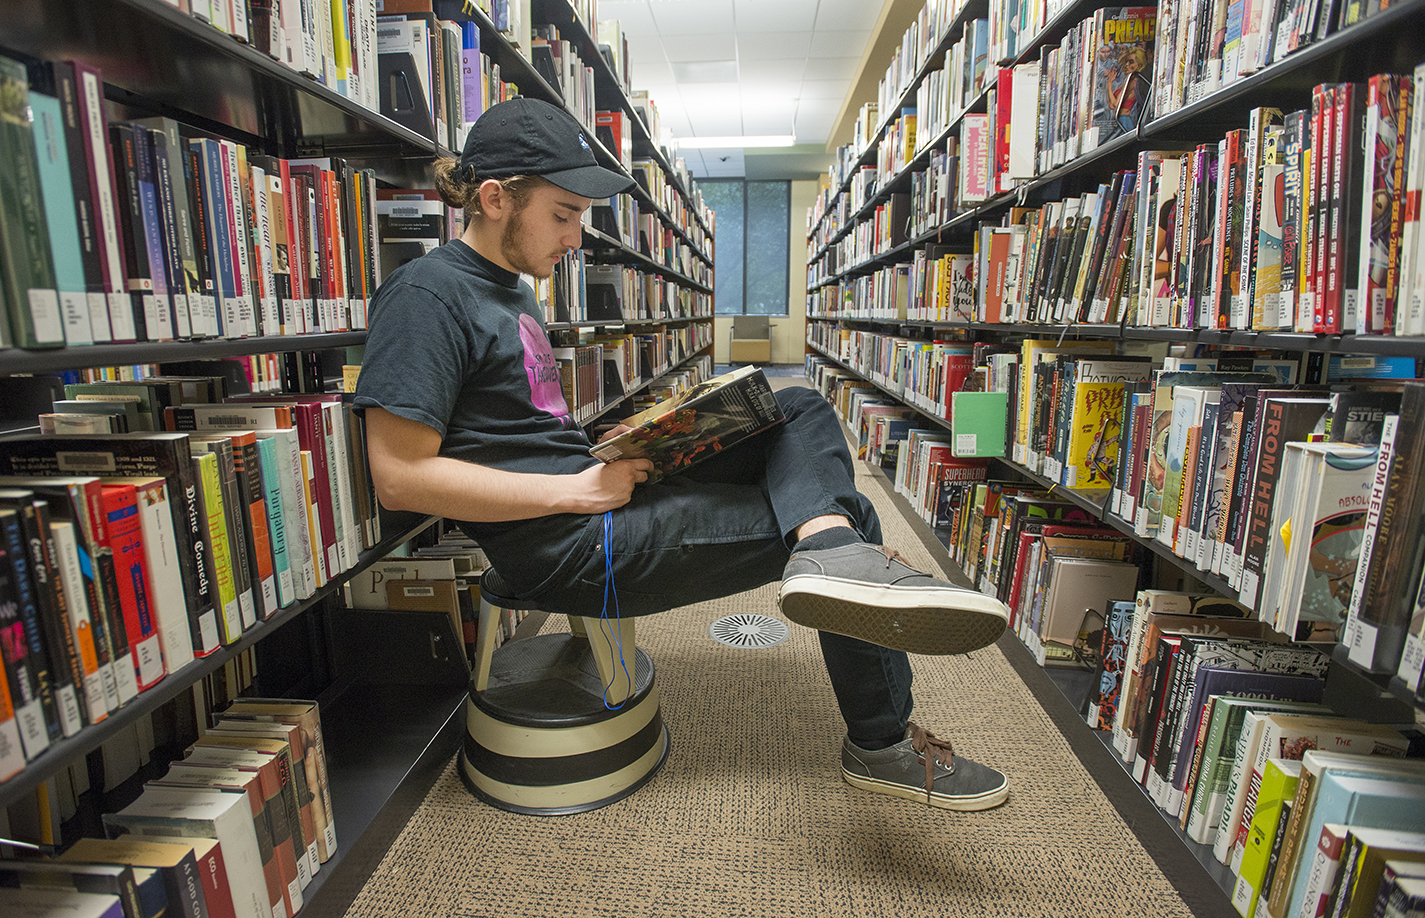 NW student Ashton Hinrjos sits and reads in the TR library while waiting to go to his next class.